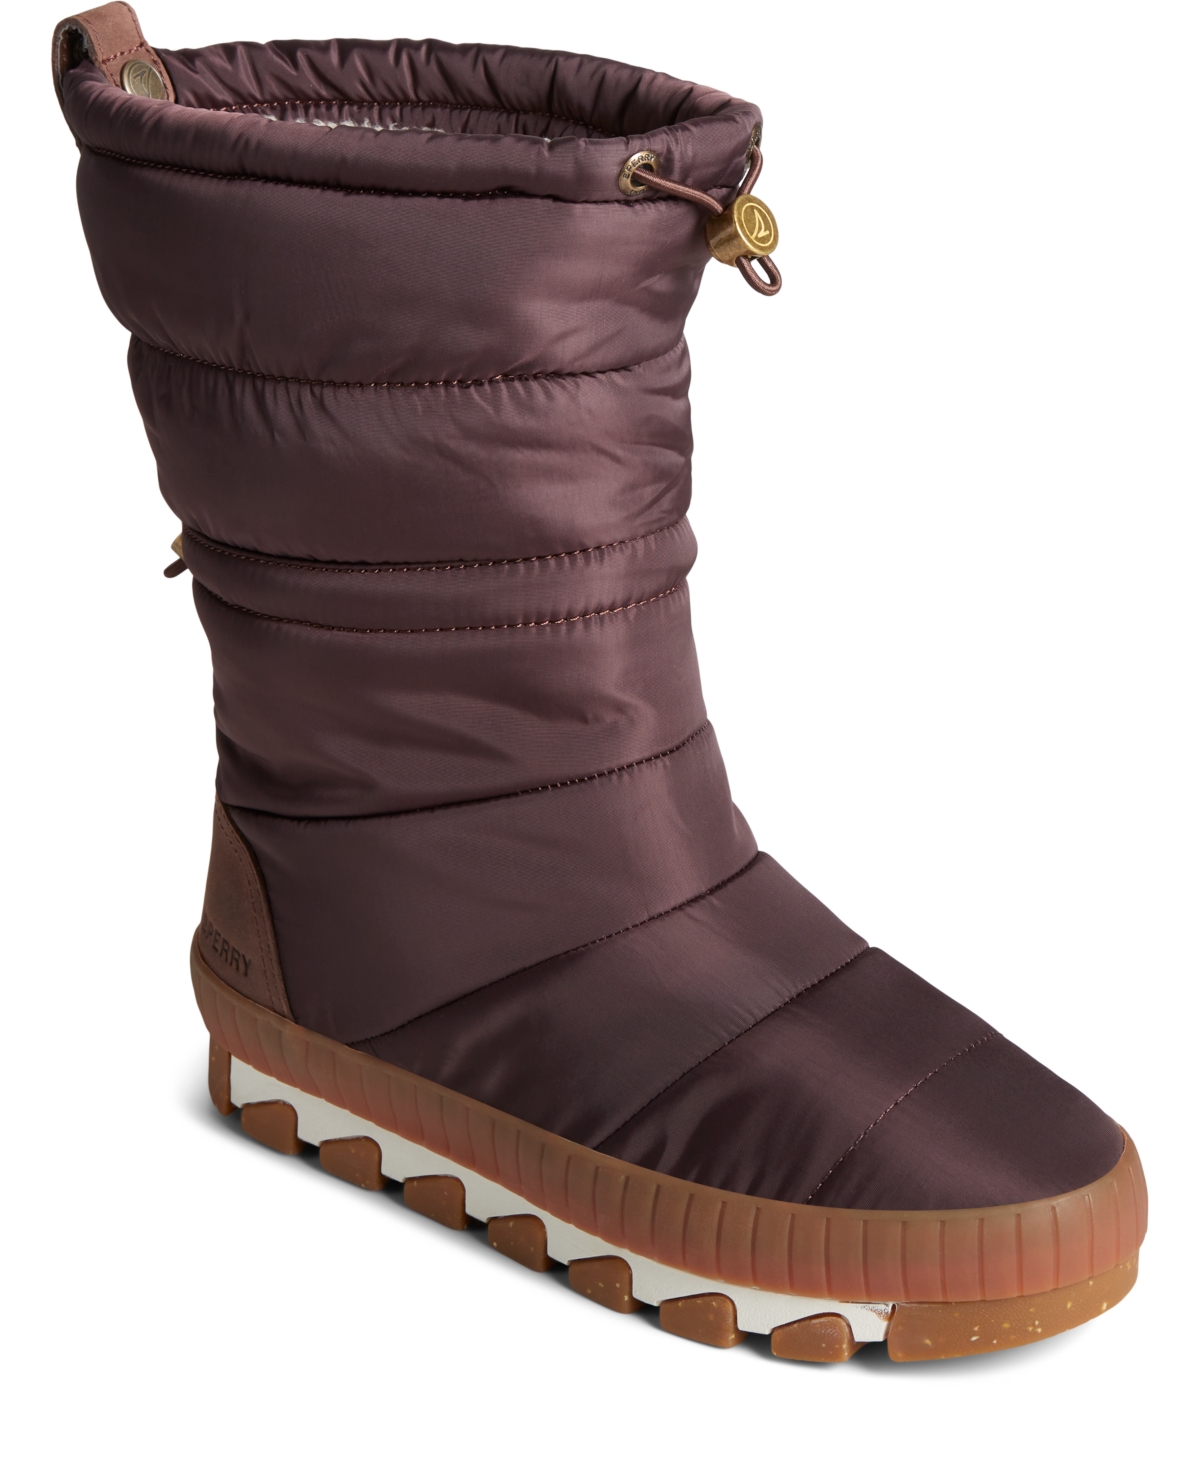 Women's Torrent Cold Weather Wide Calf Boots - Brown